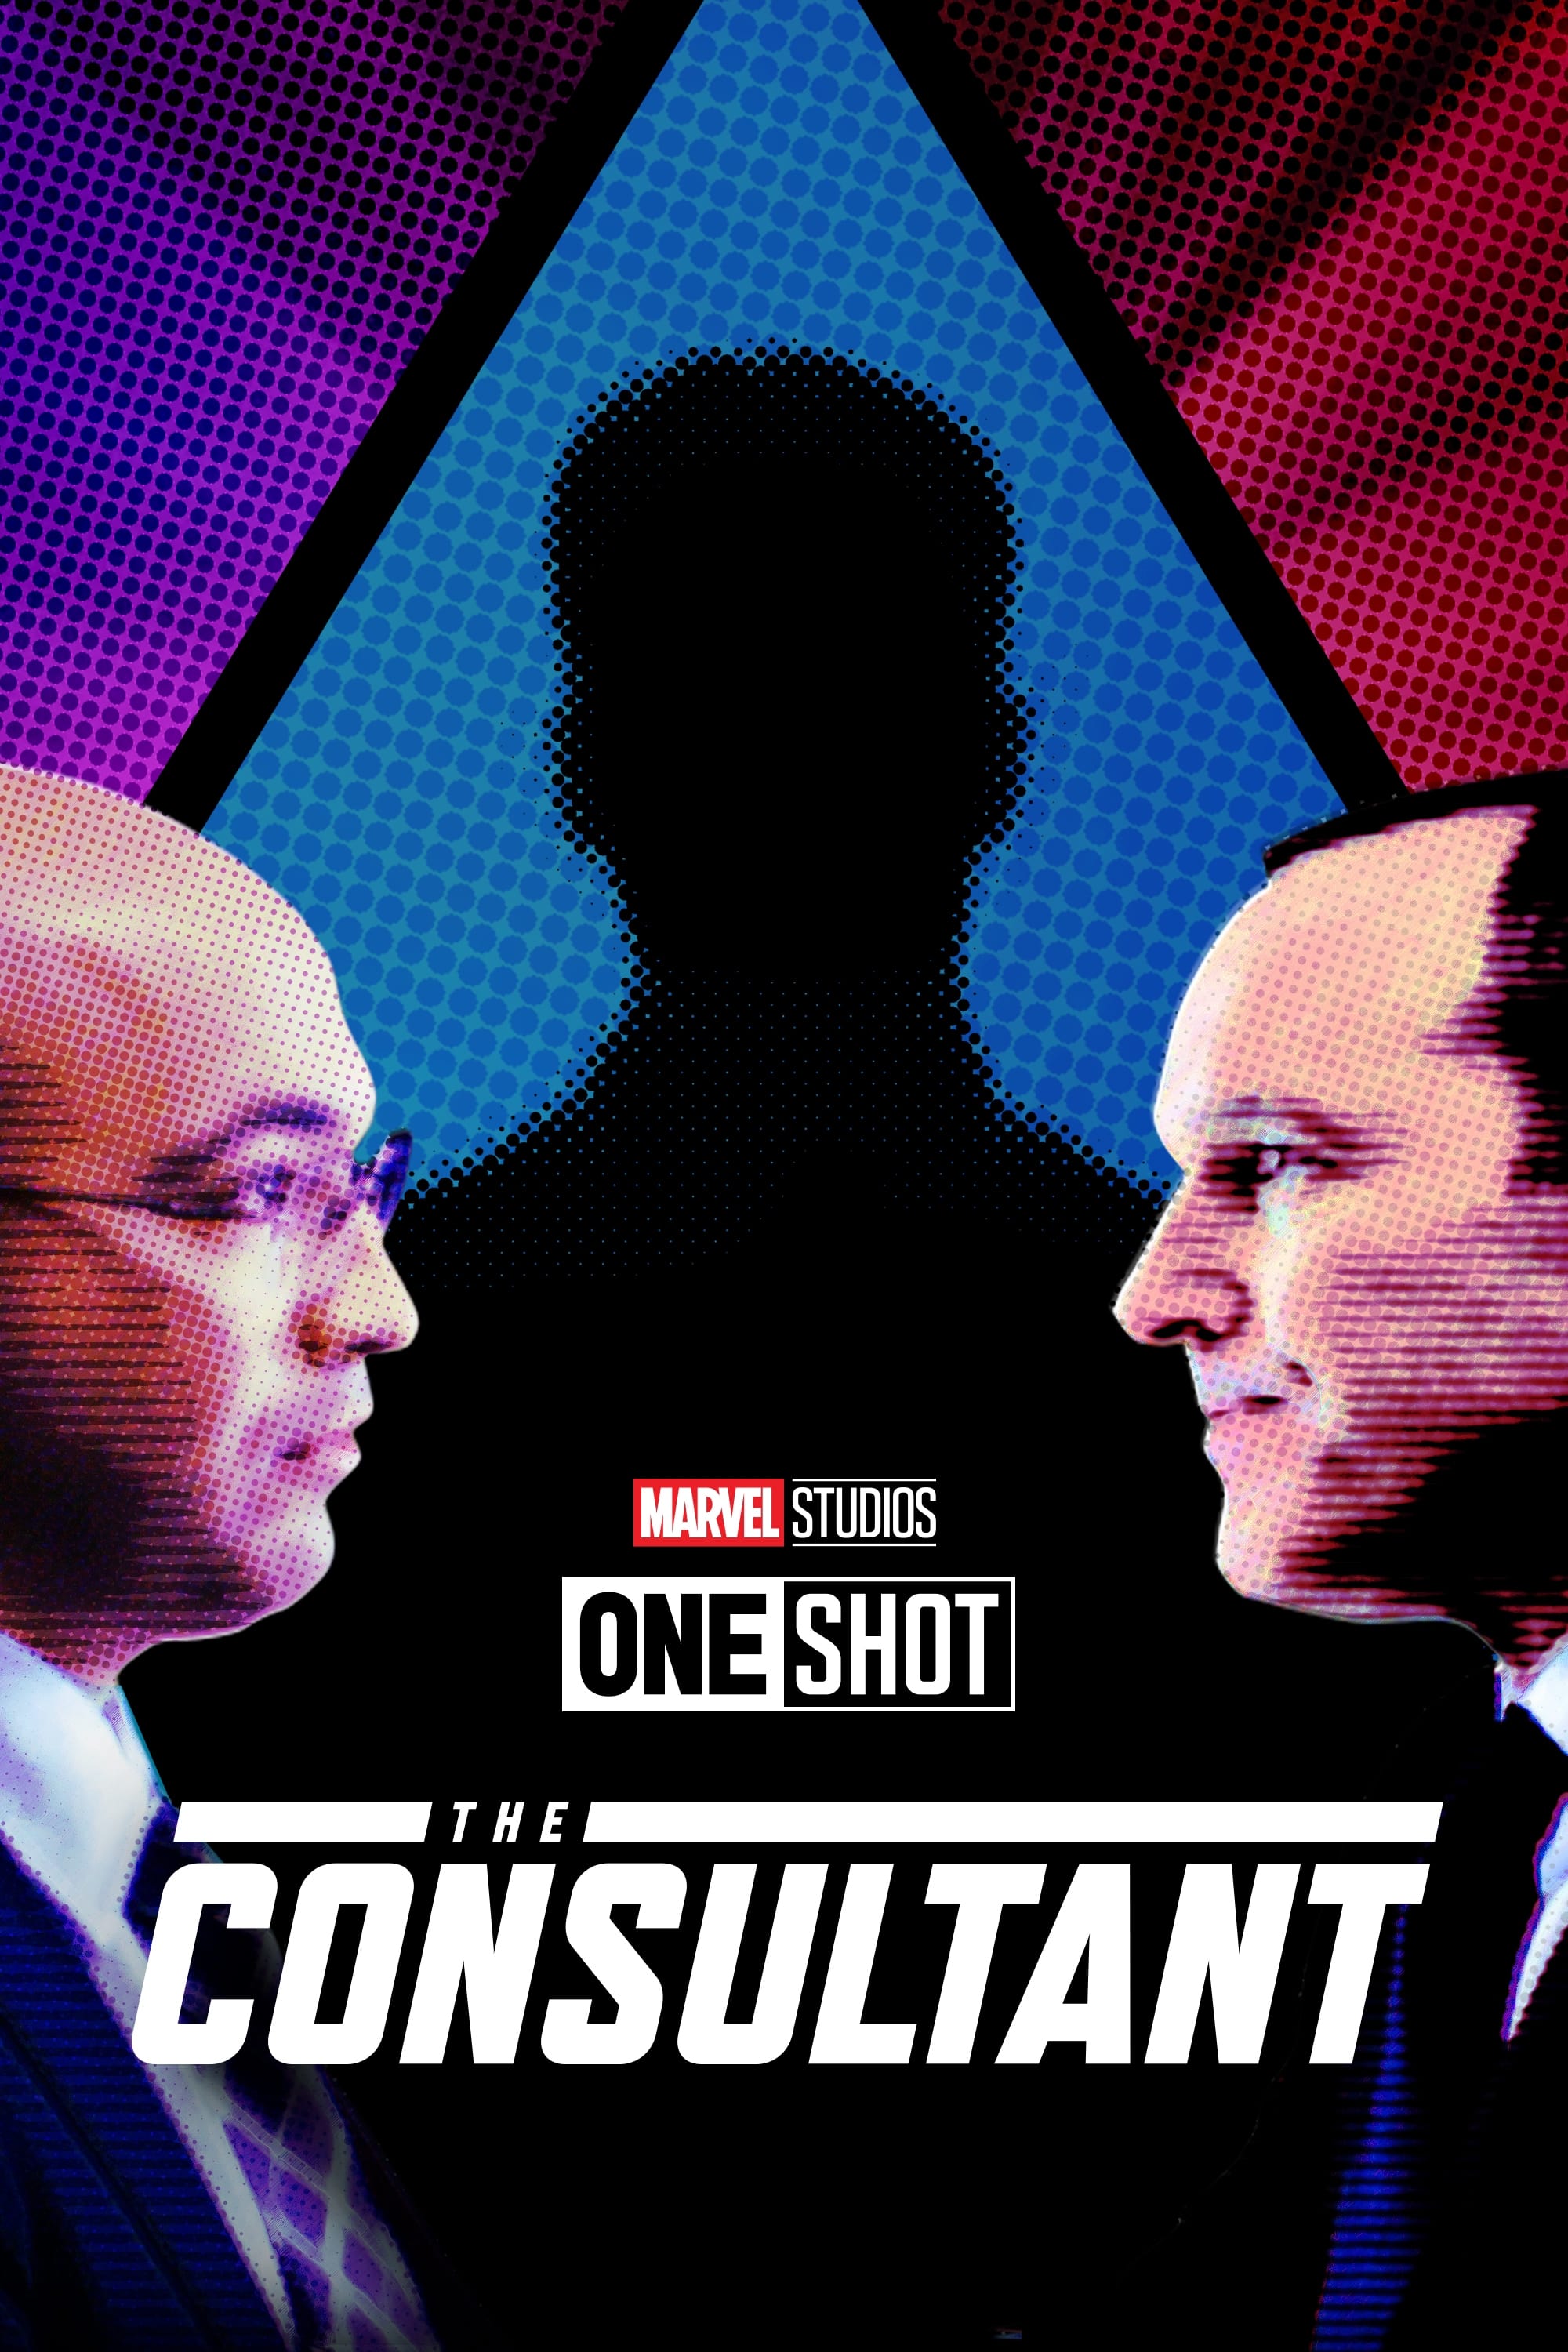 Marvel One-Shot: The Consultant (2011)